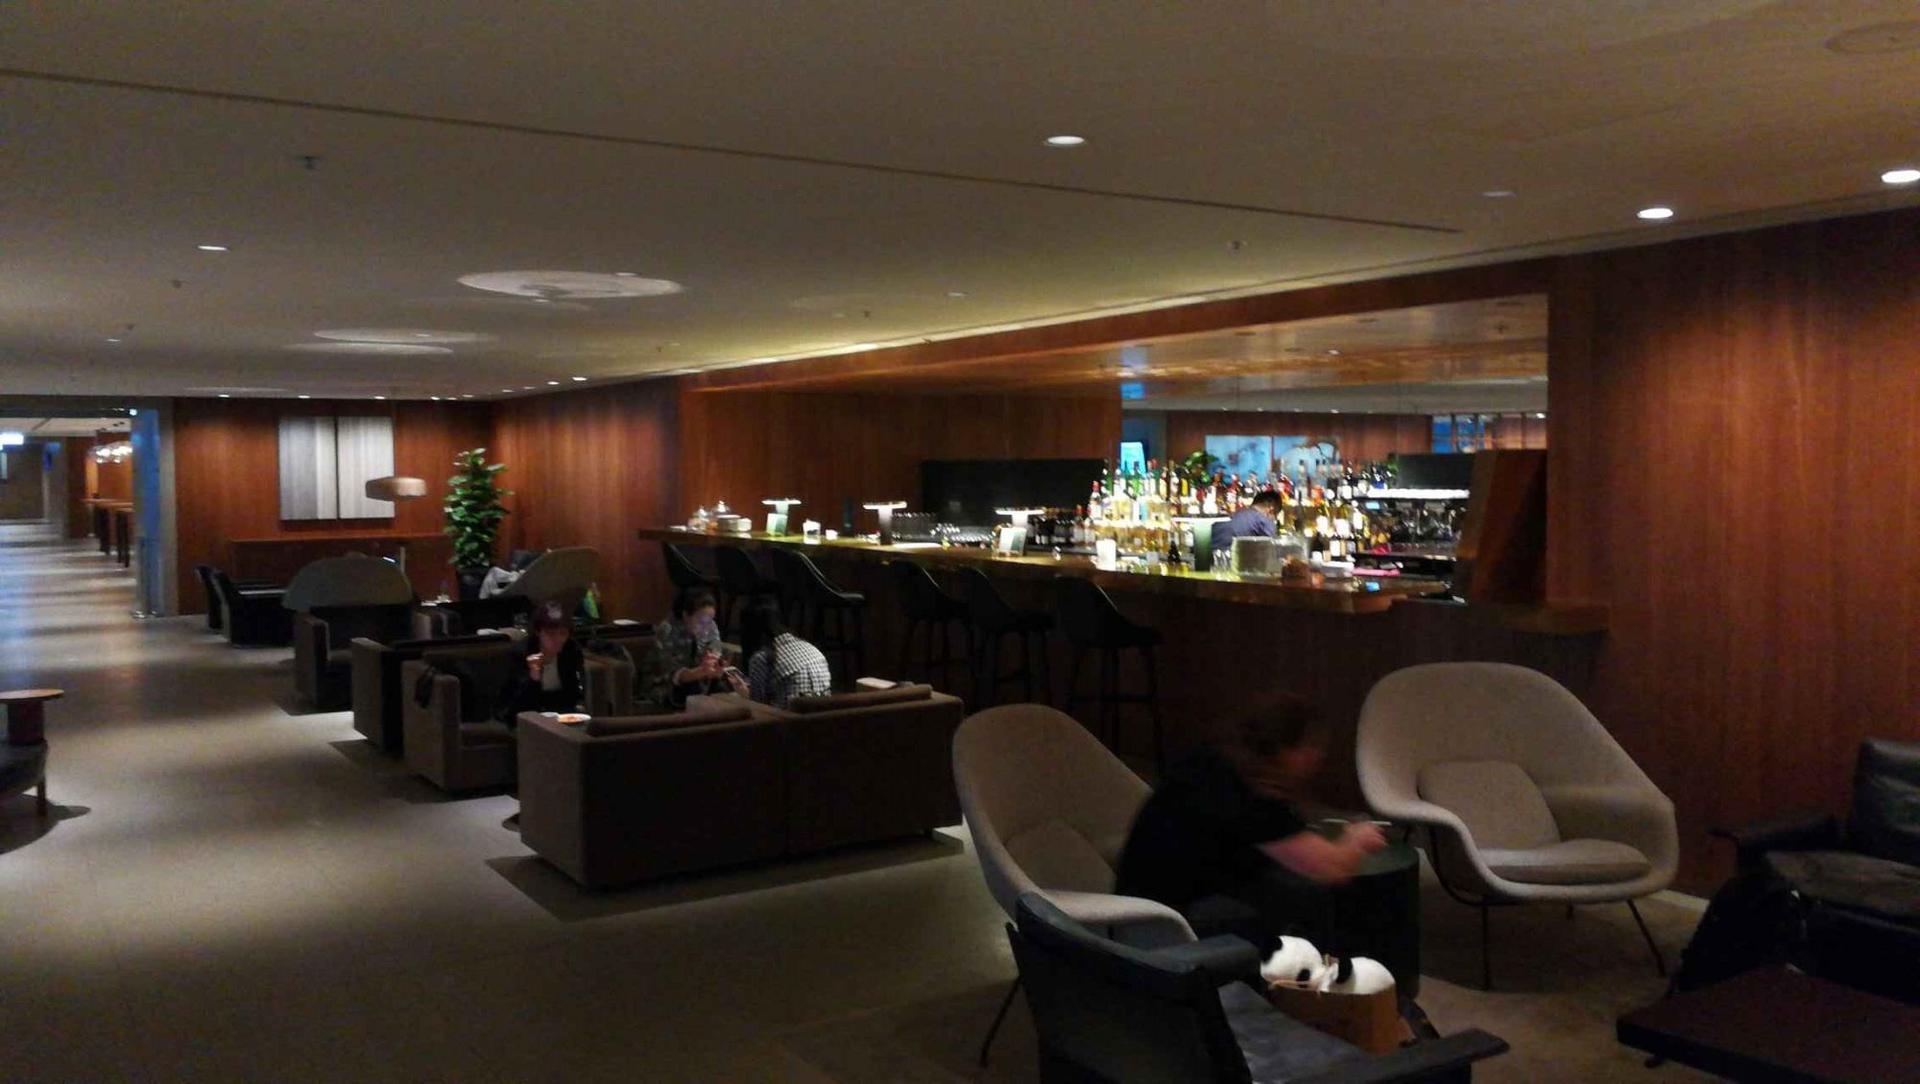 Cathay Pacific The Pier Business Class Lounge image 40 of 61